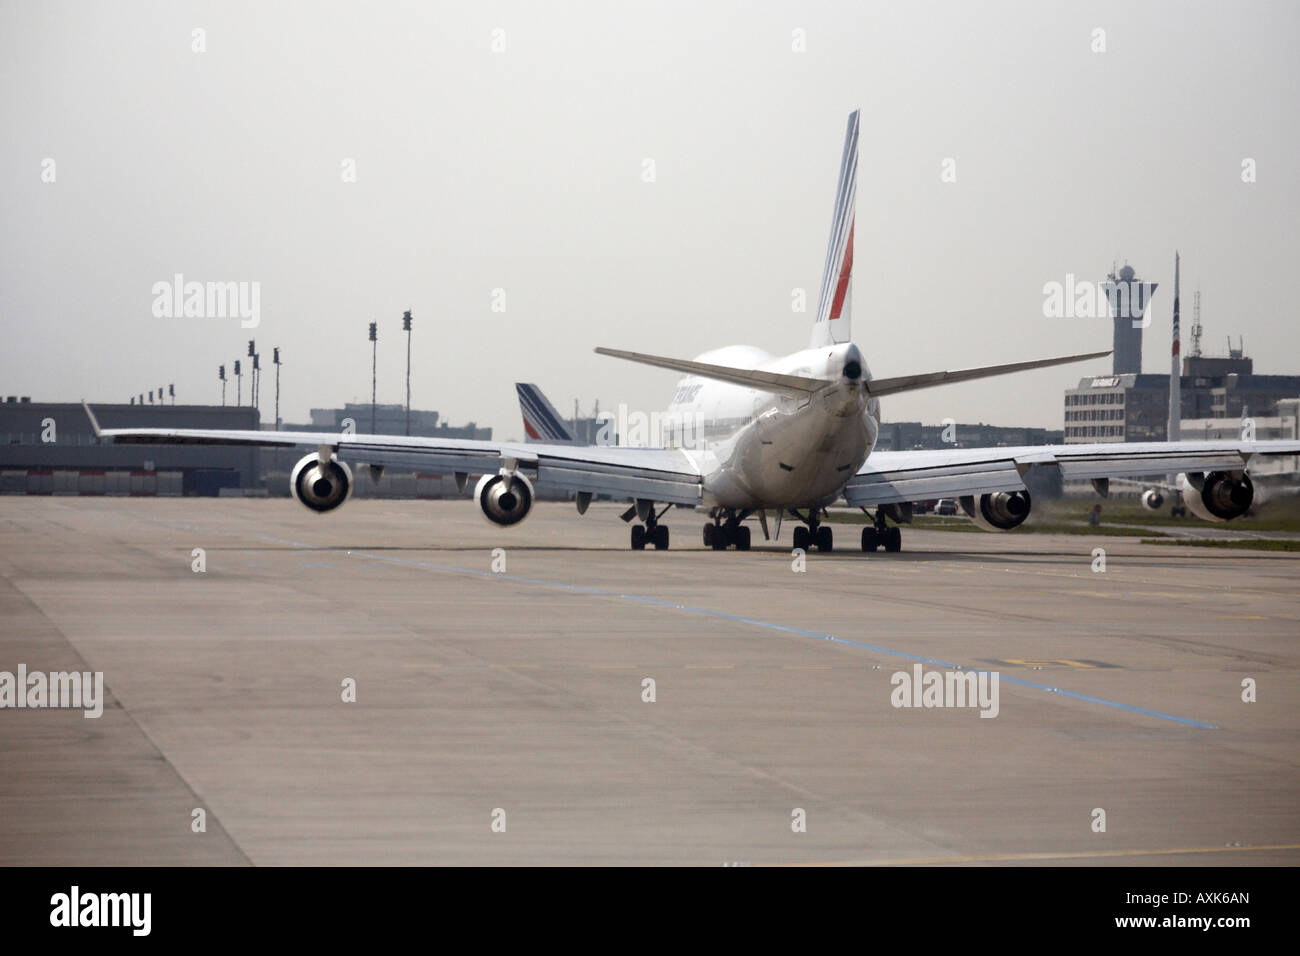 Air France Boeing 747 Jumbo Jet taxiing on taxiway at Charles De Gaulle International Airport Paris France Stock Photo